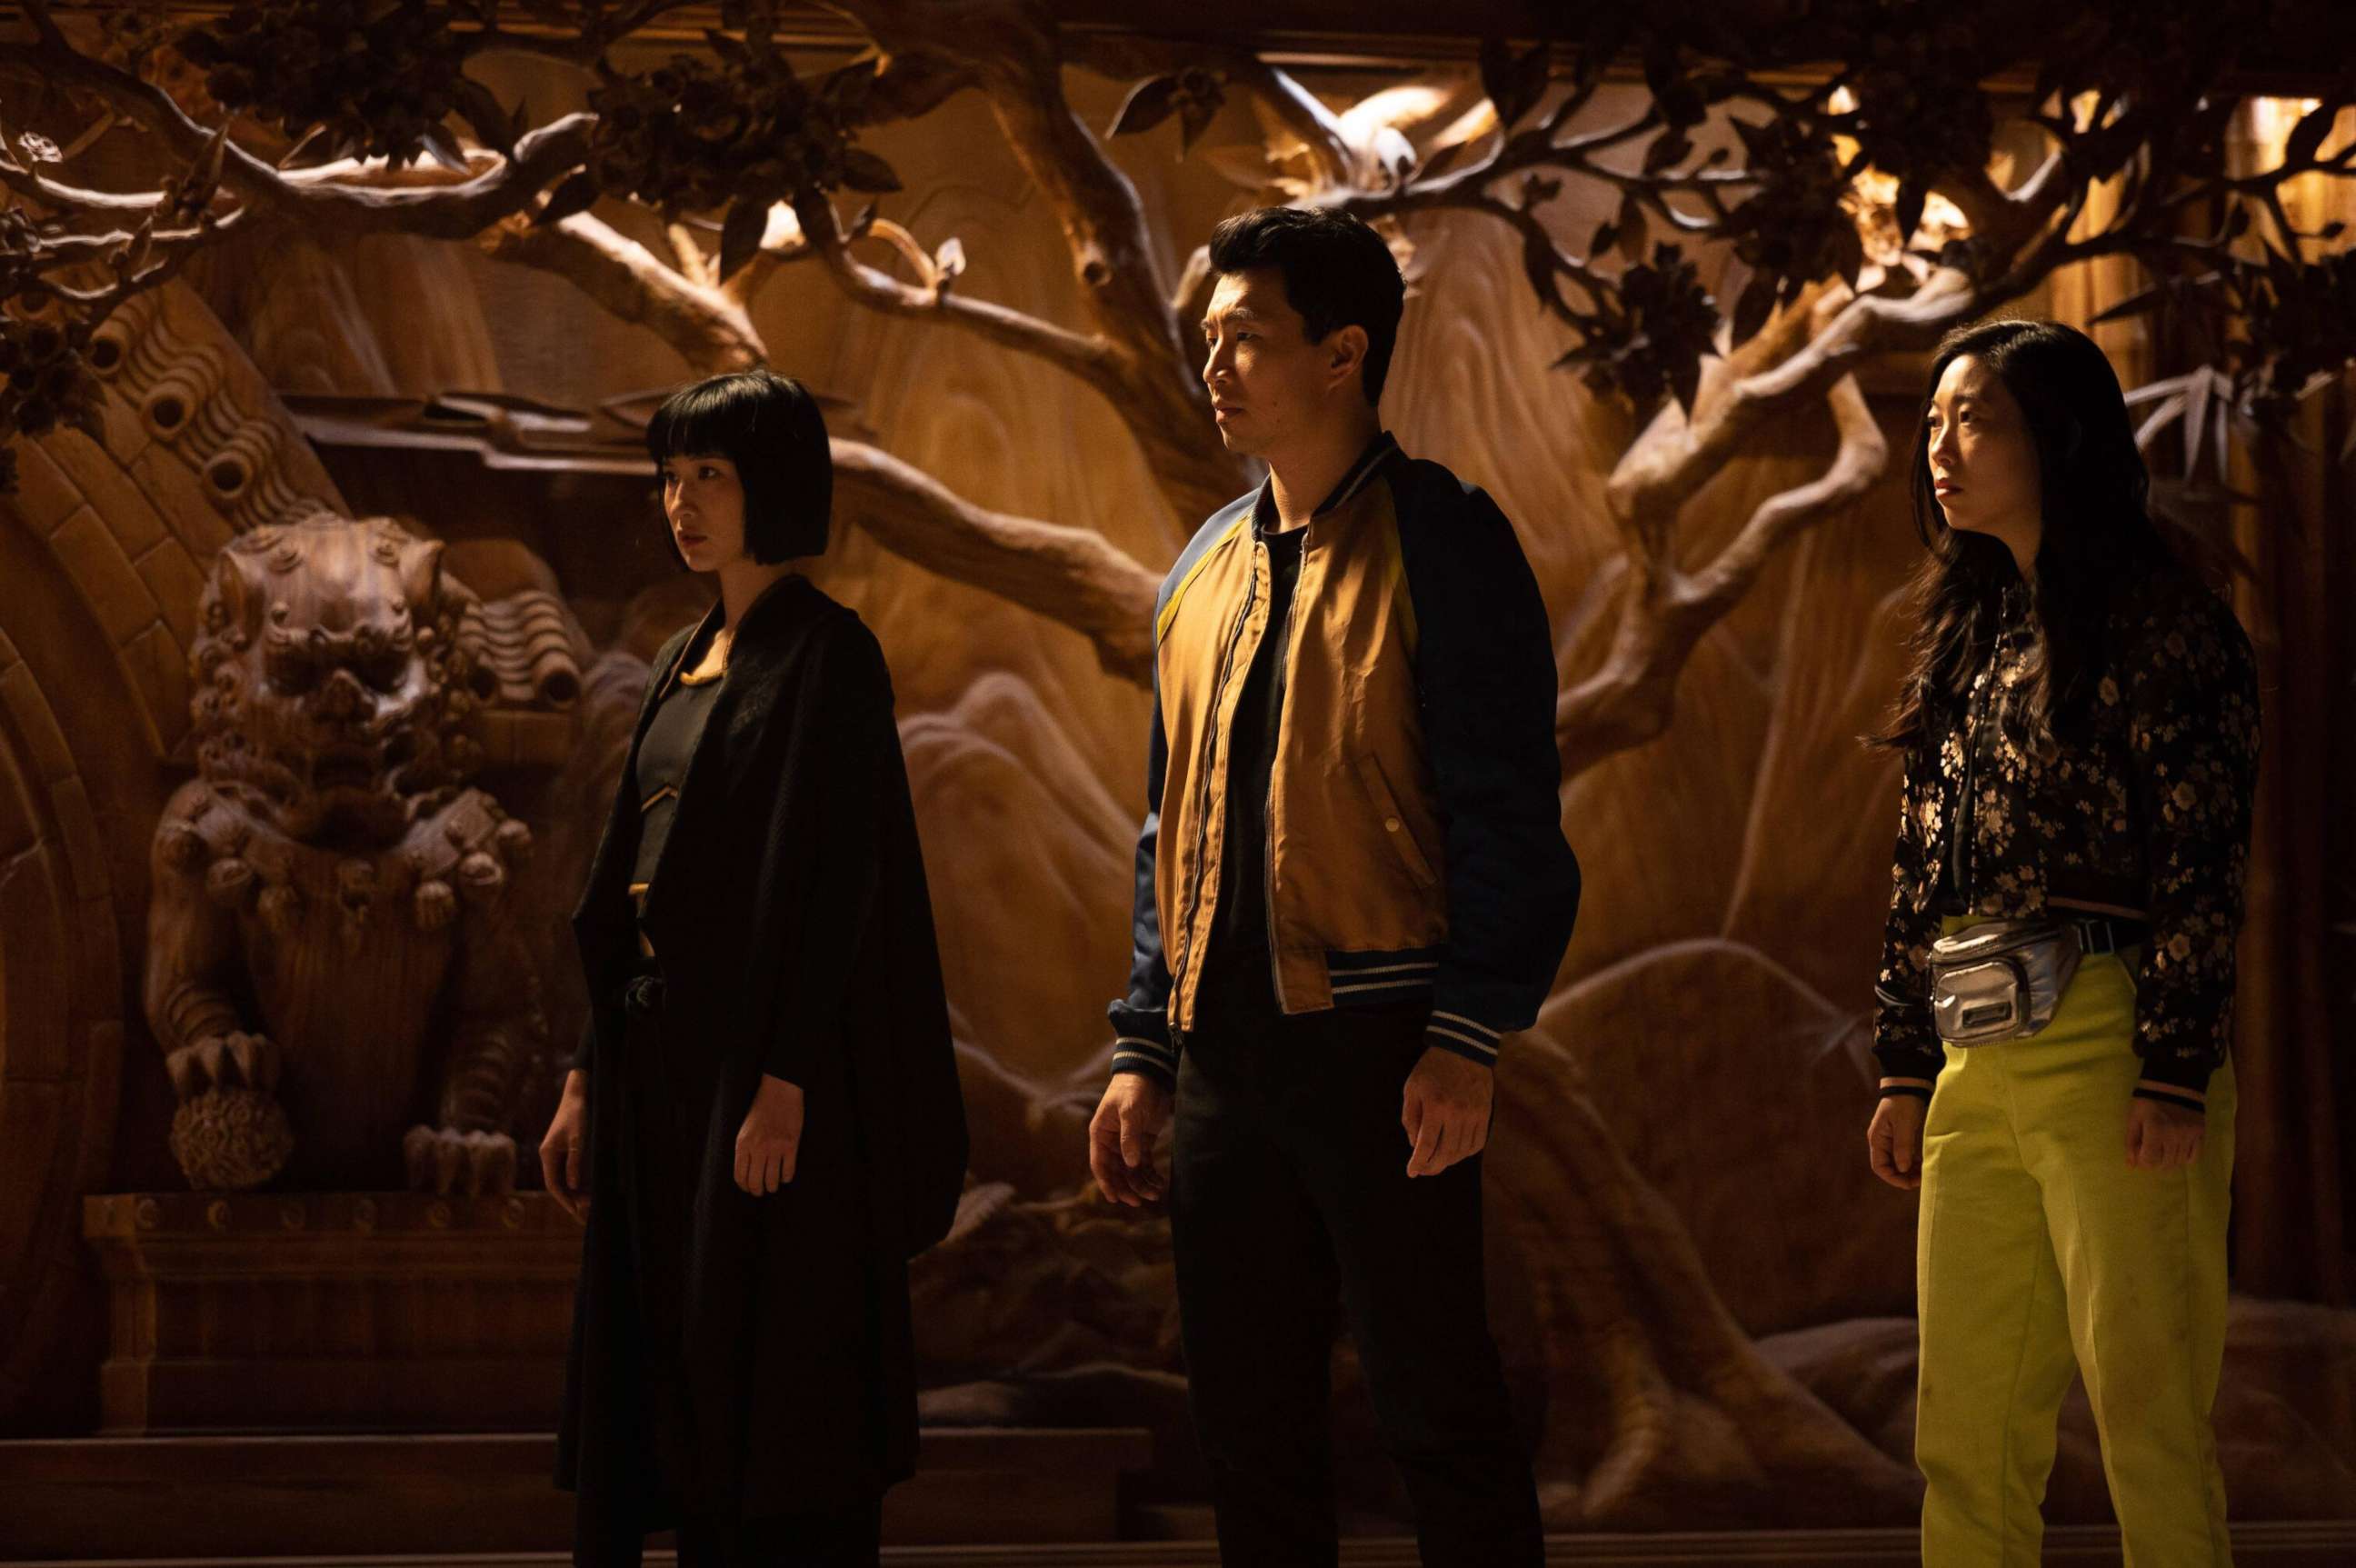 PHOTO: Left to right, Xialing (Meng'er Zhang), Shang-Chi (Simu Liu) and Katy (Awkwafina) in Marvel Studios' "Shang-Chi and the Legend of the Ten Rings."